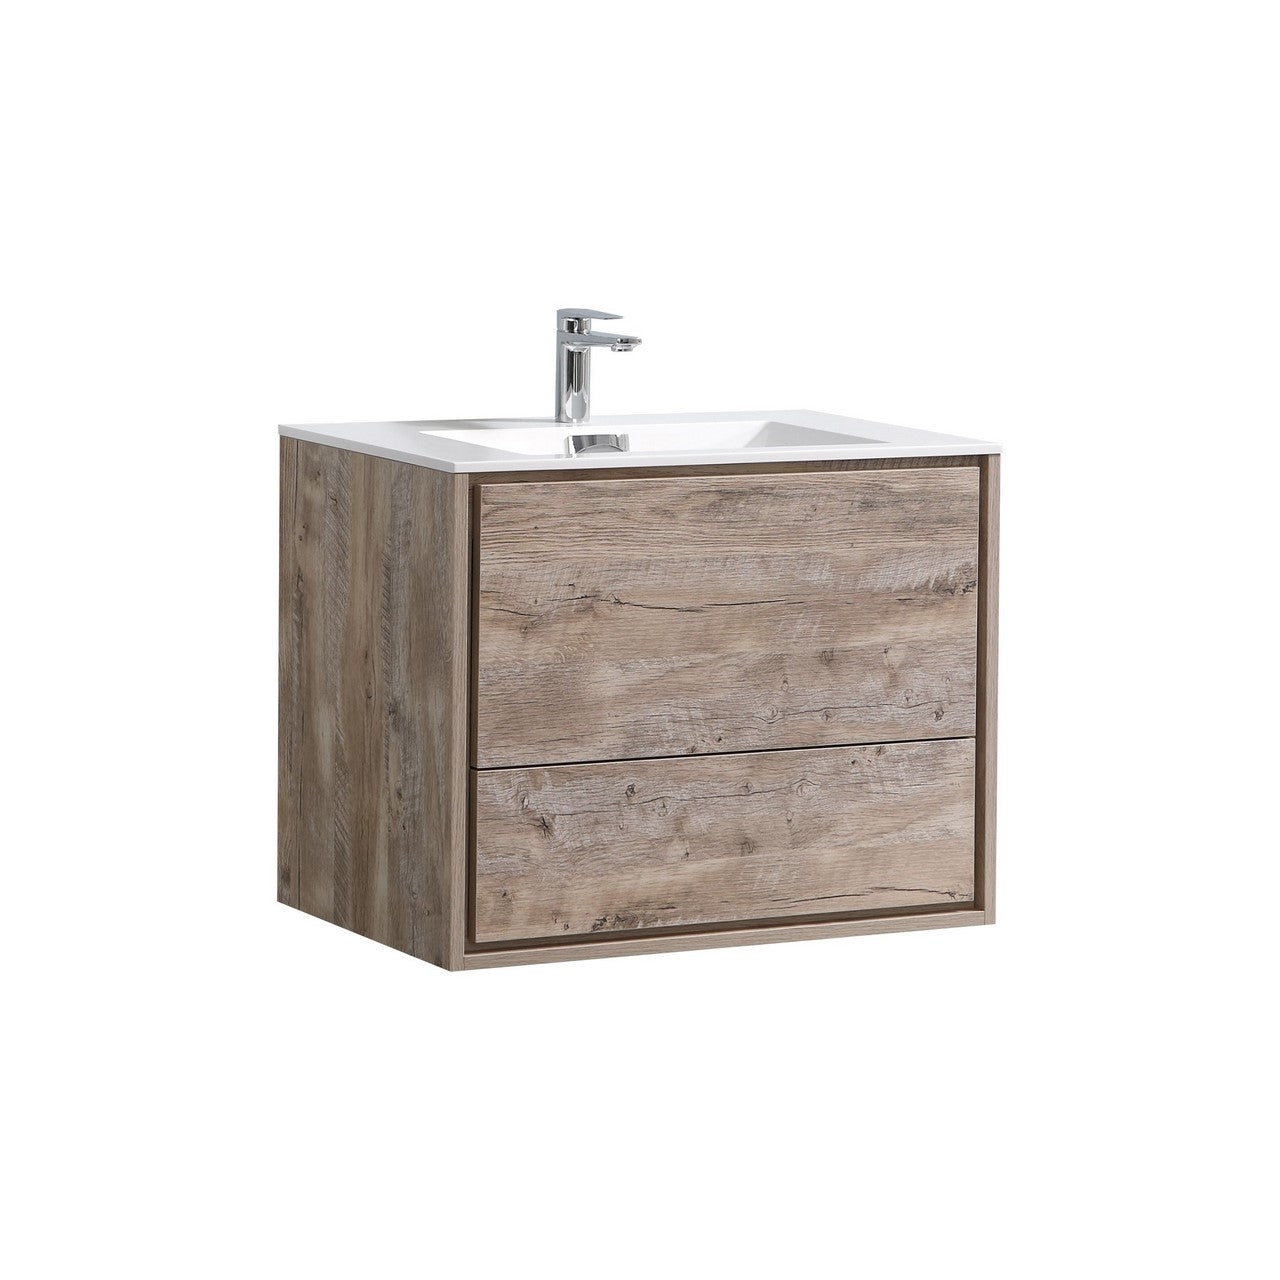 KUBEBATH De Lusso DL30-NW 30" Single Wall Mount Bathroom Vanity in Nature Wood with White Acrylic Composite, Integrated Sink, Angled View